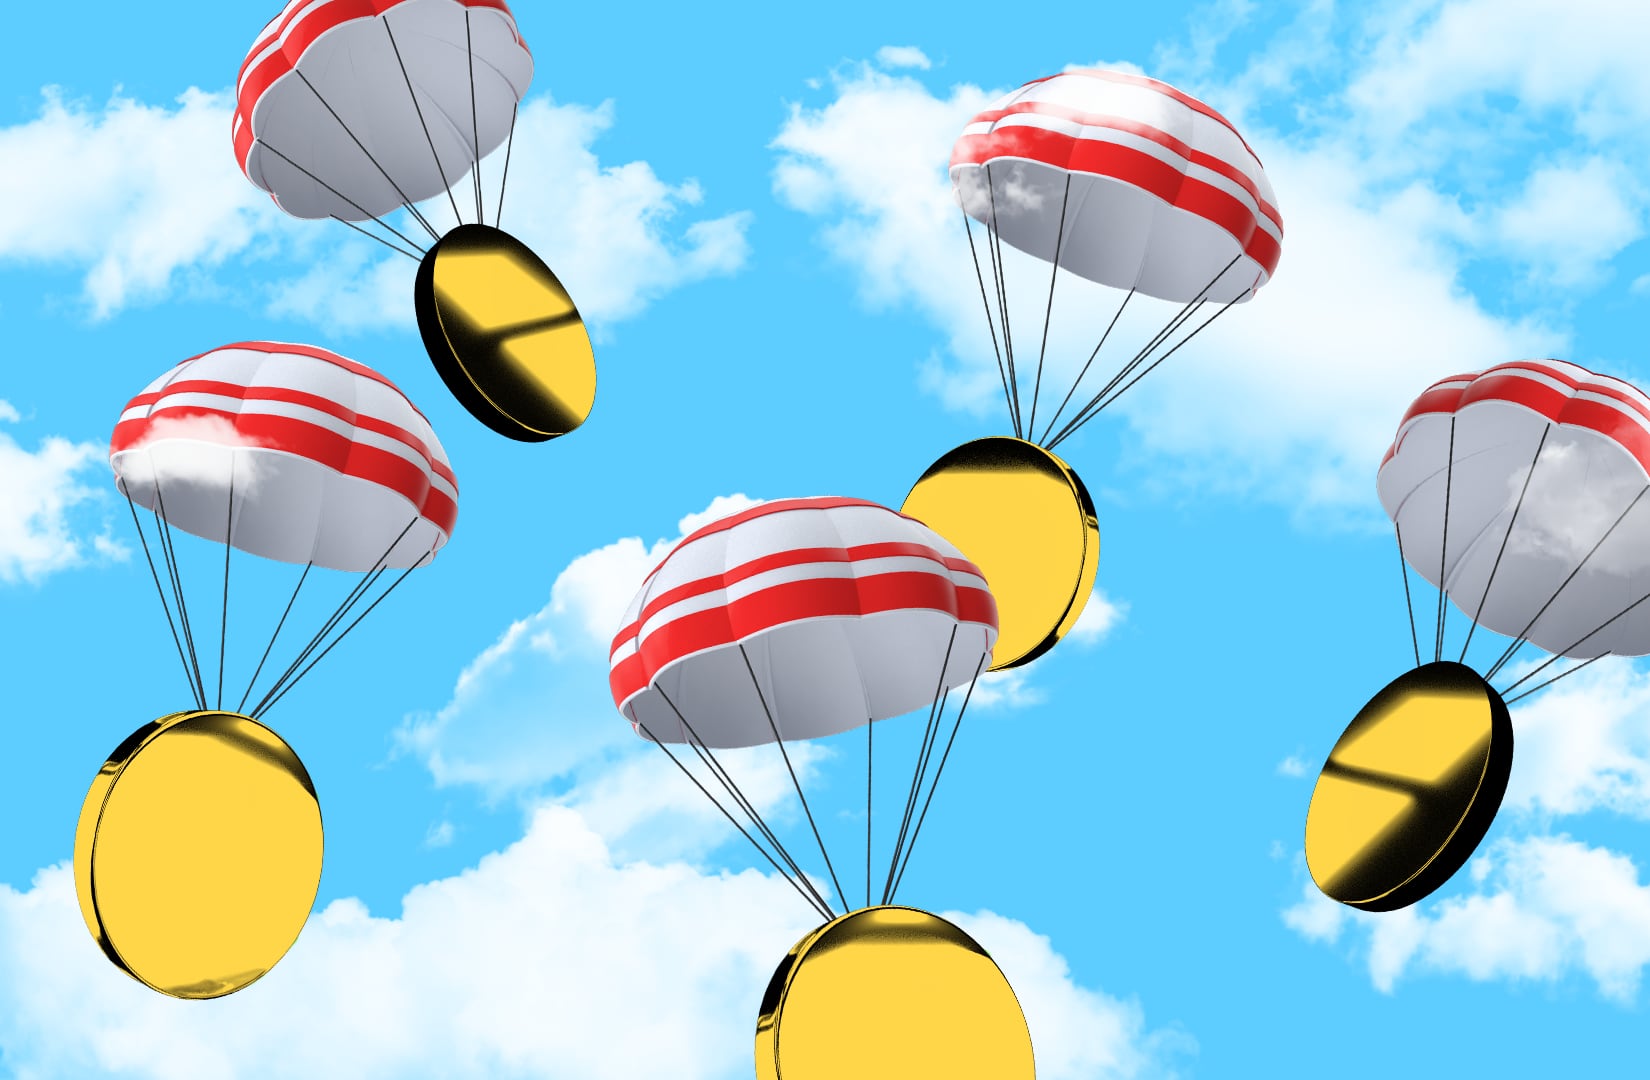 ZKsync showers users with token airdrop: ‘It’s not a financial thing,’ says CEO